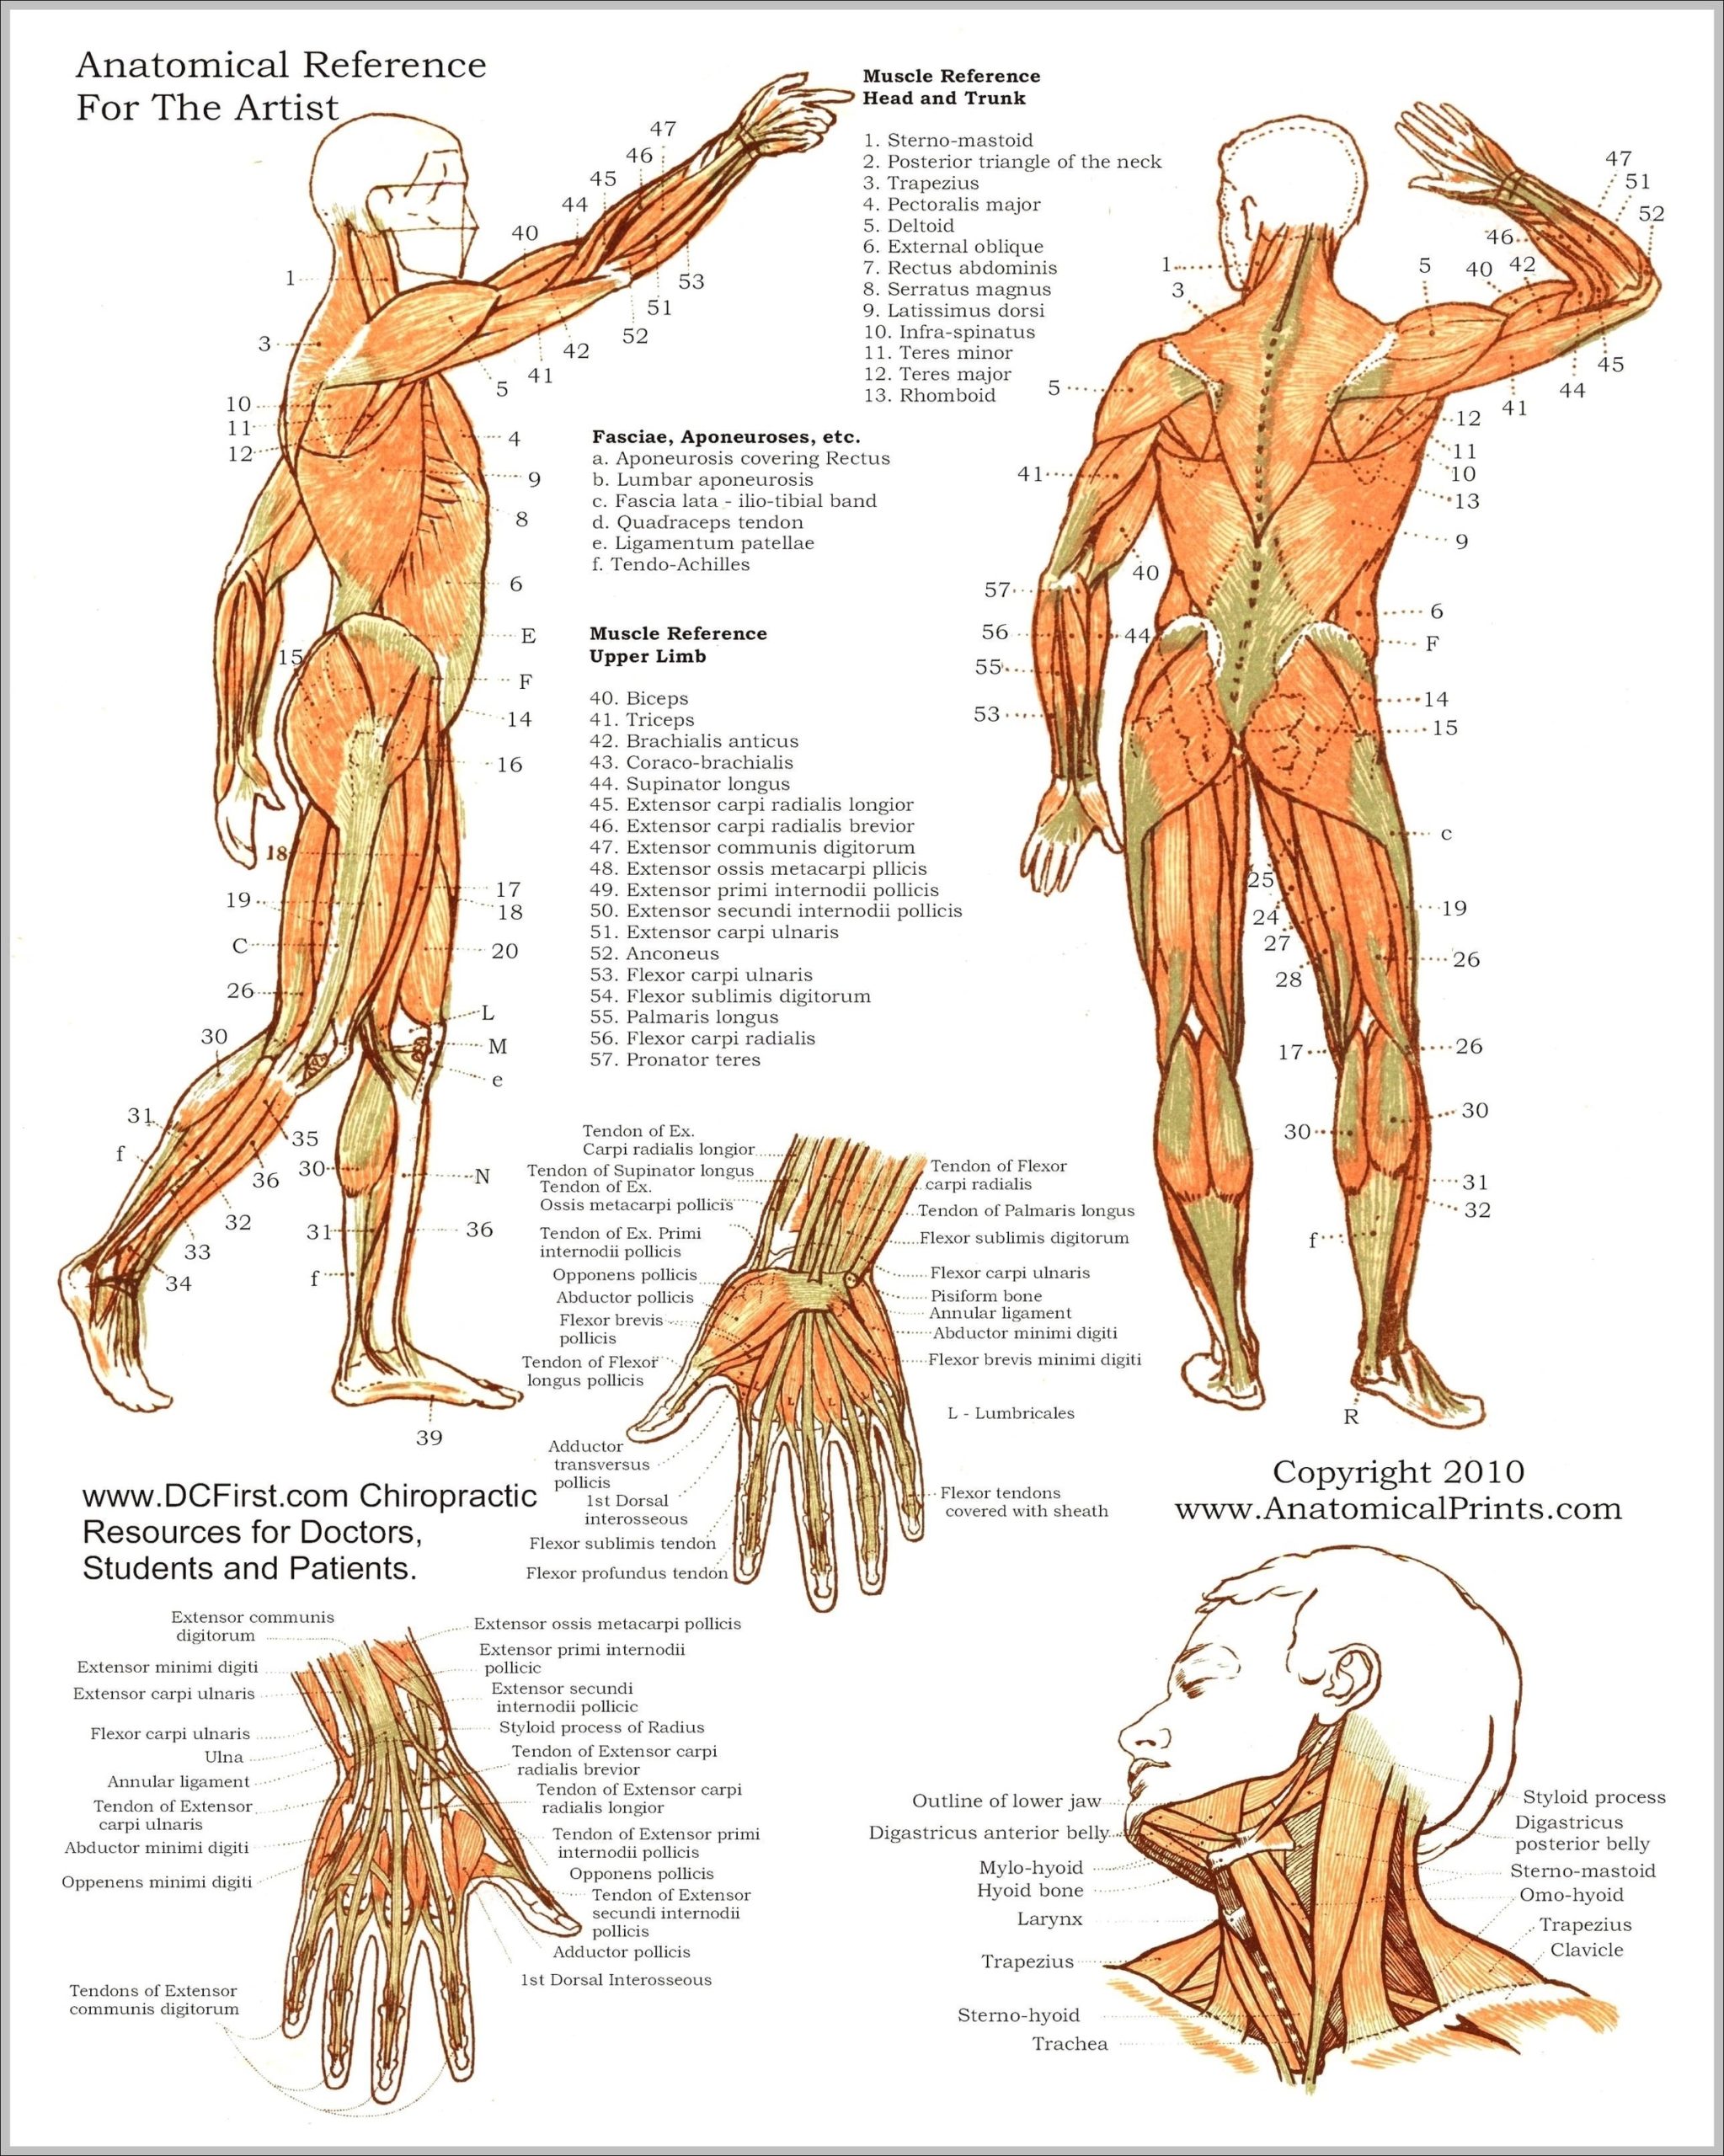 Anatomy Study Guide Muscles Image scaled